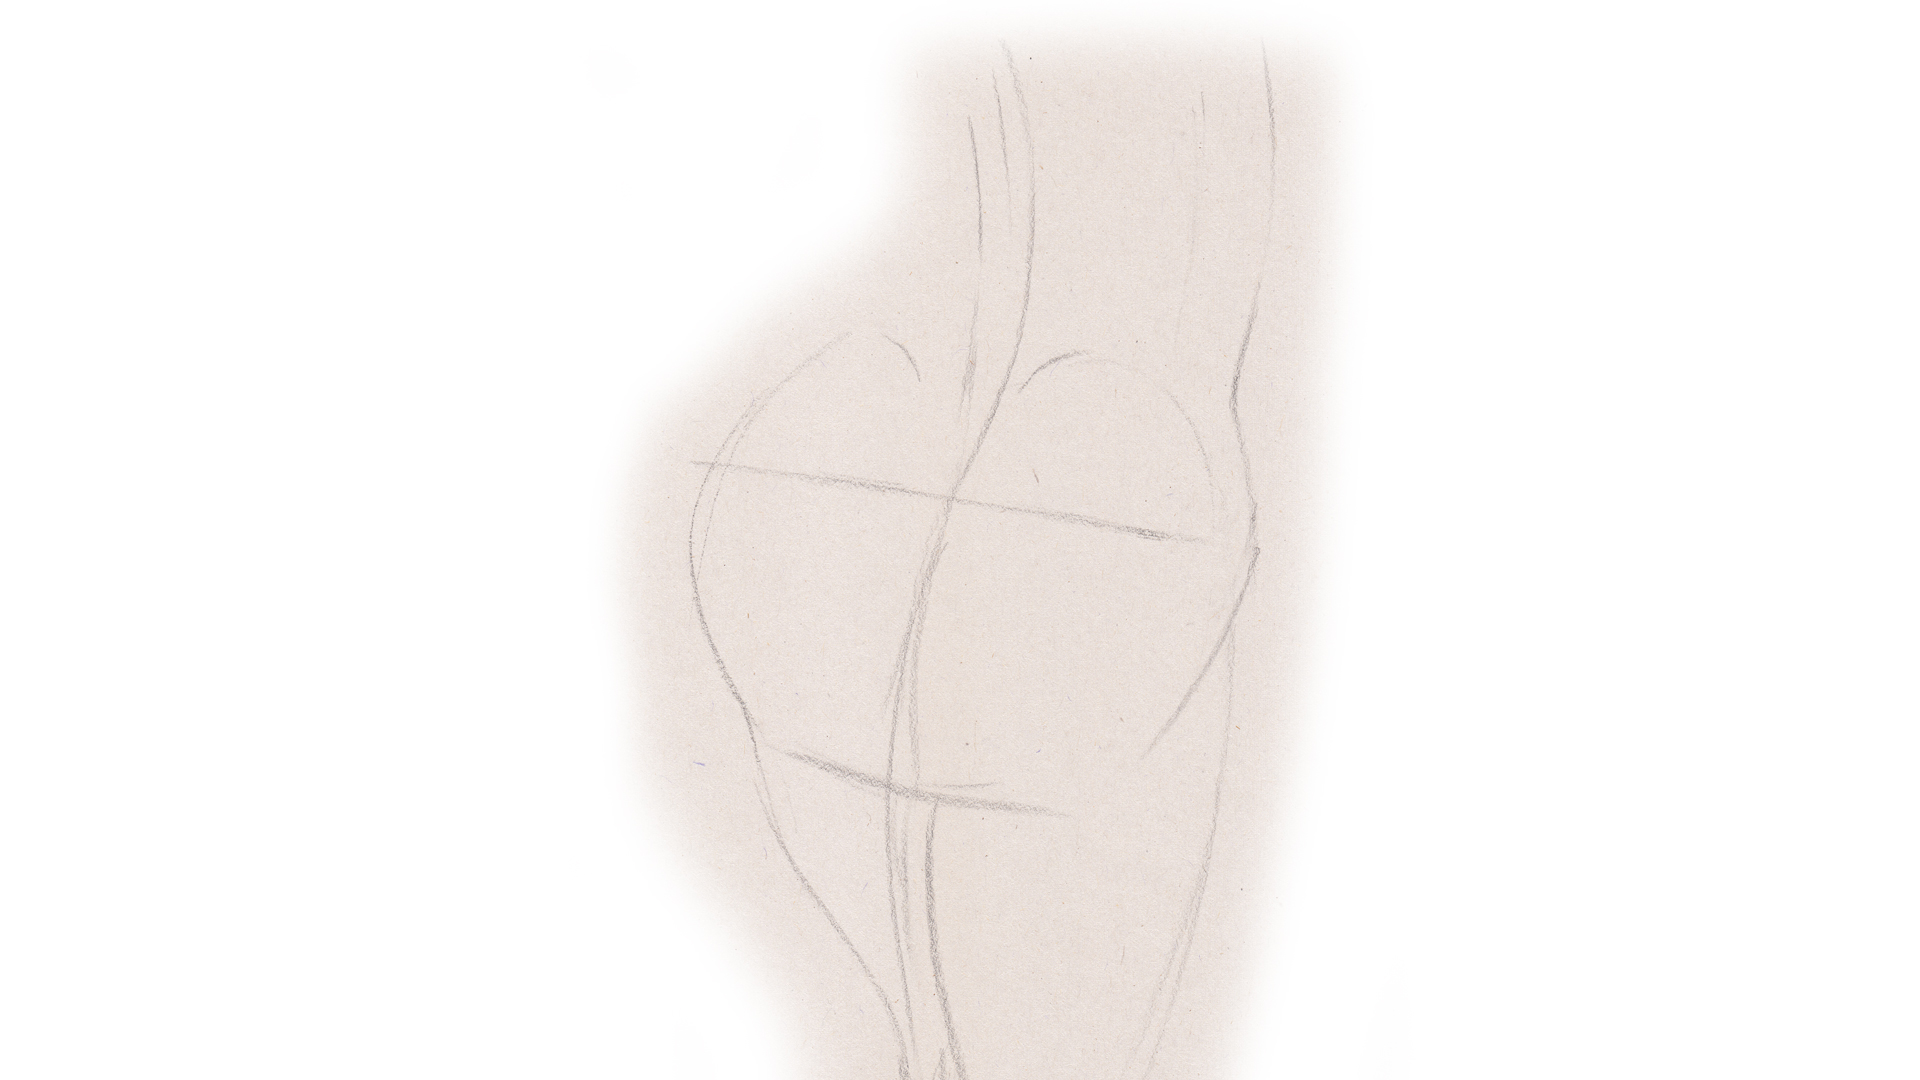 How to draw hips, buttocks and genitals. · opsafetynow